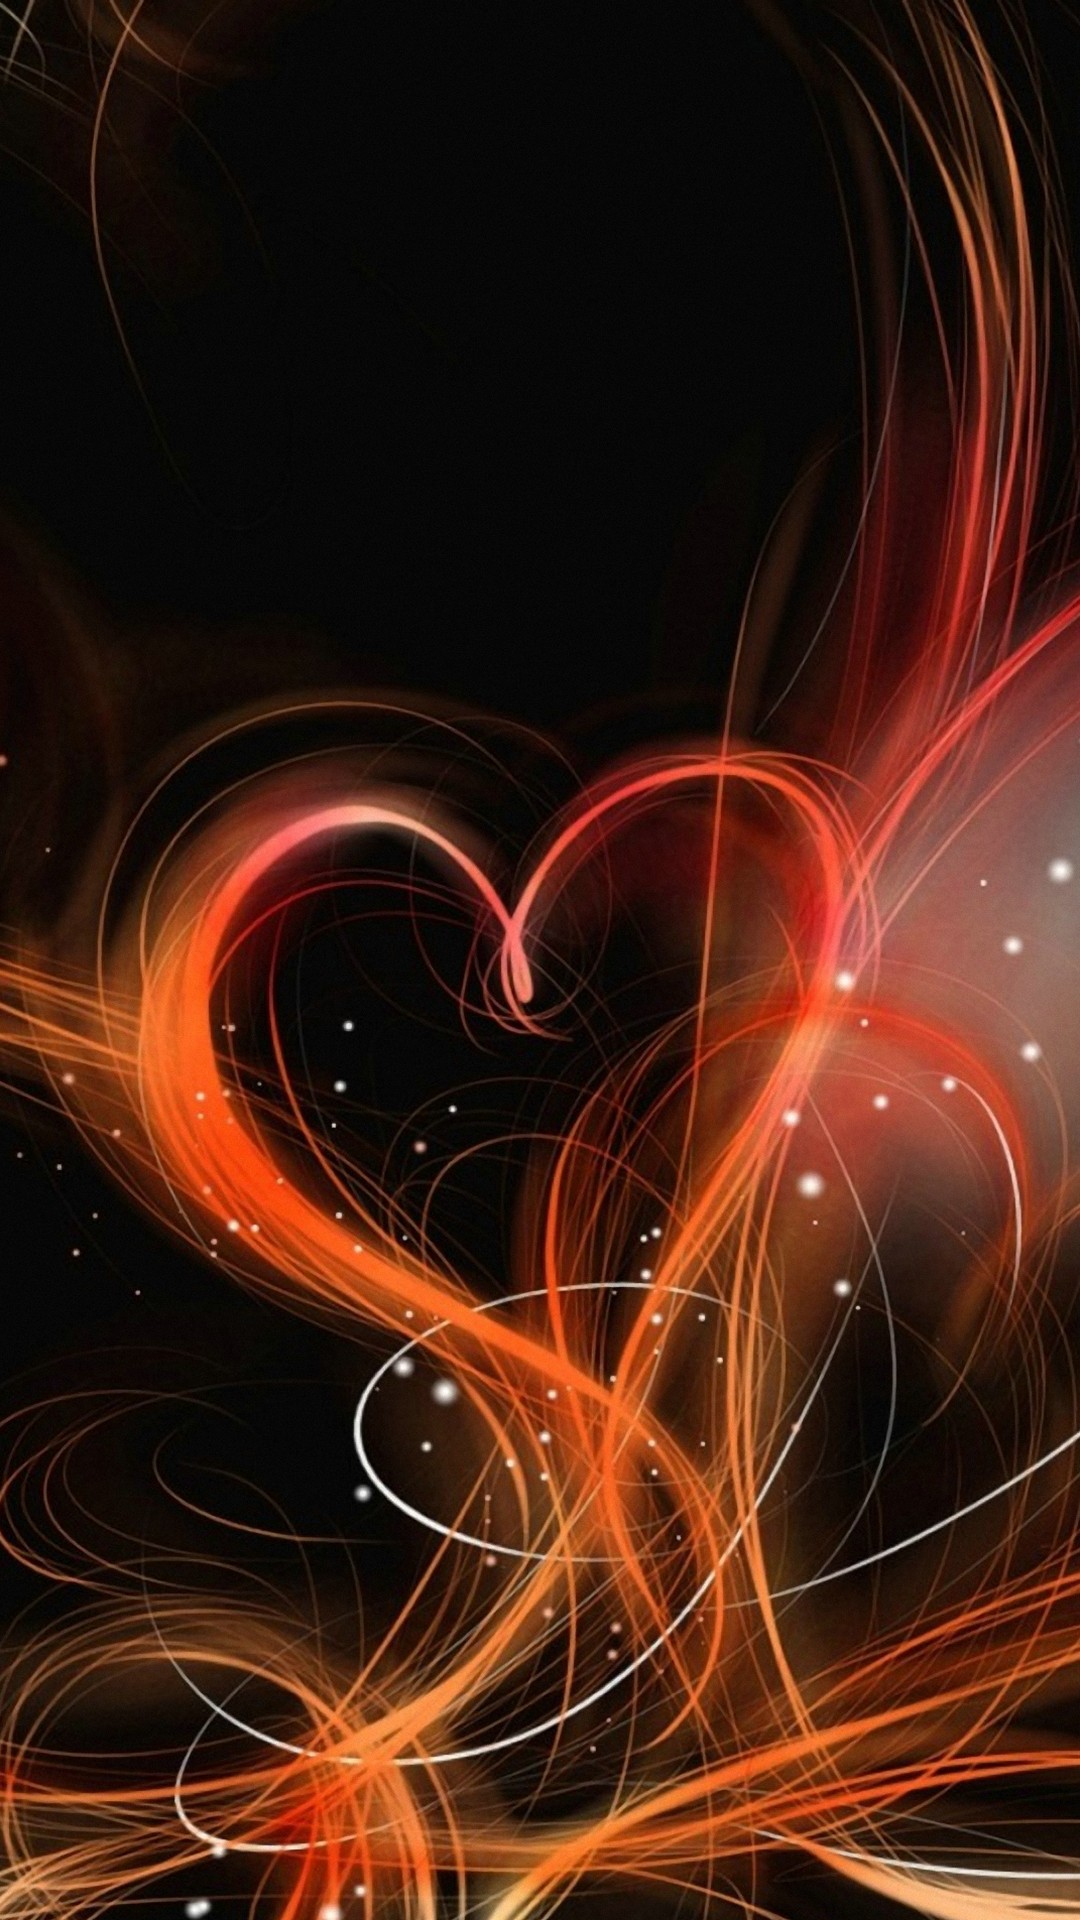 Abstract Love Android Wallpaper with HD resolution 1080x1920